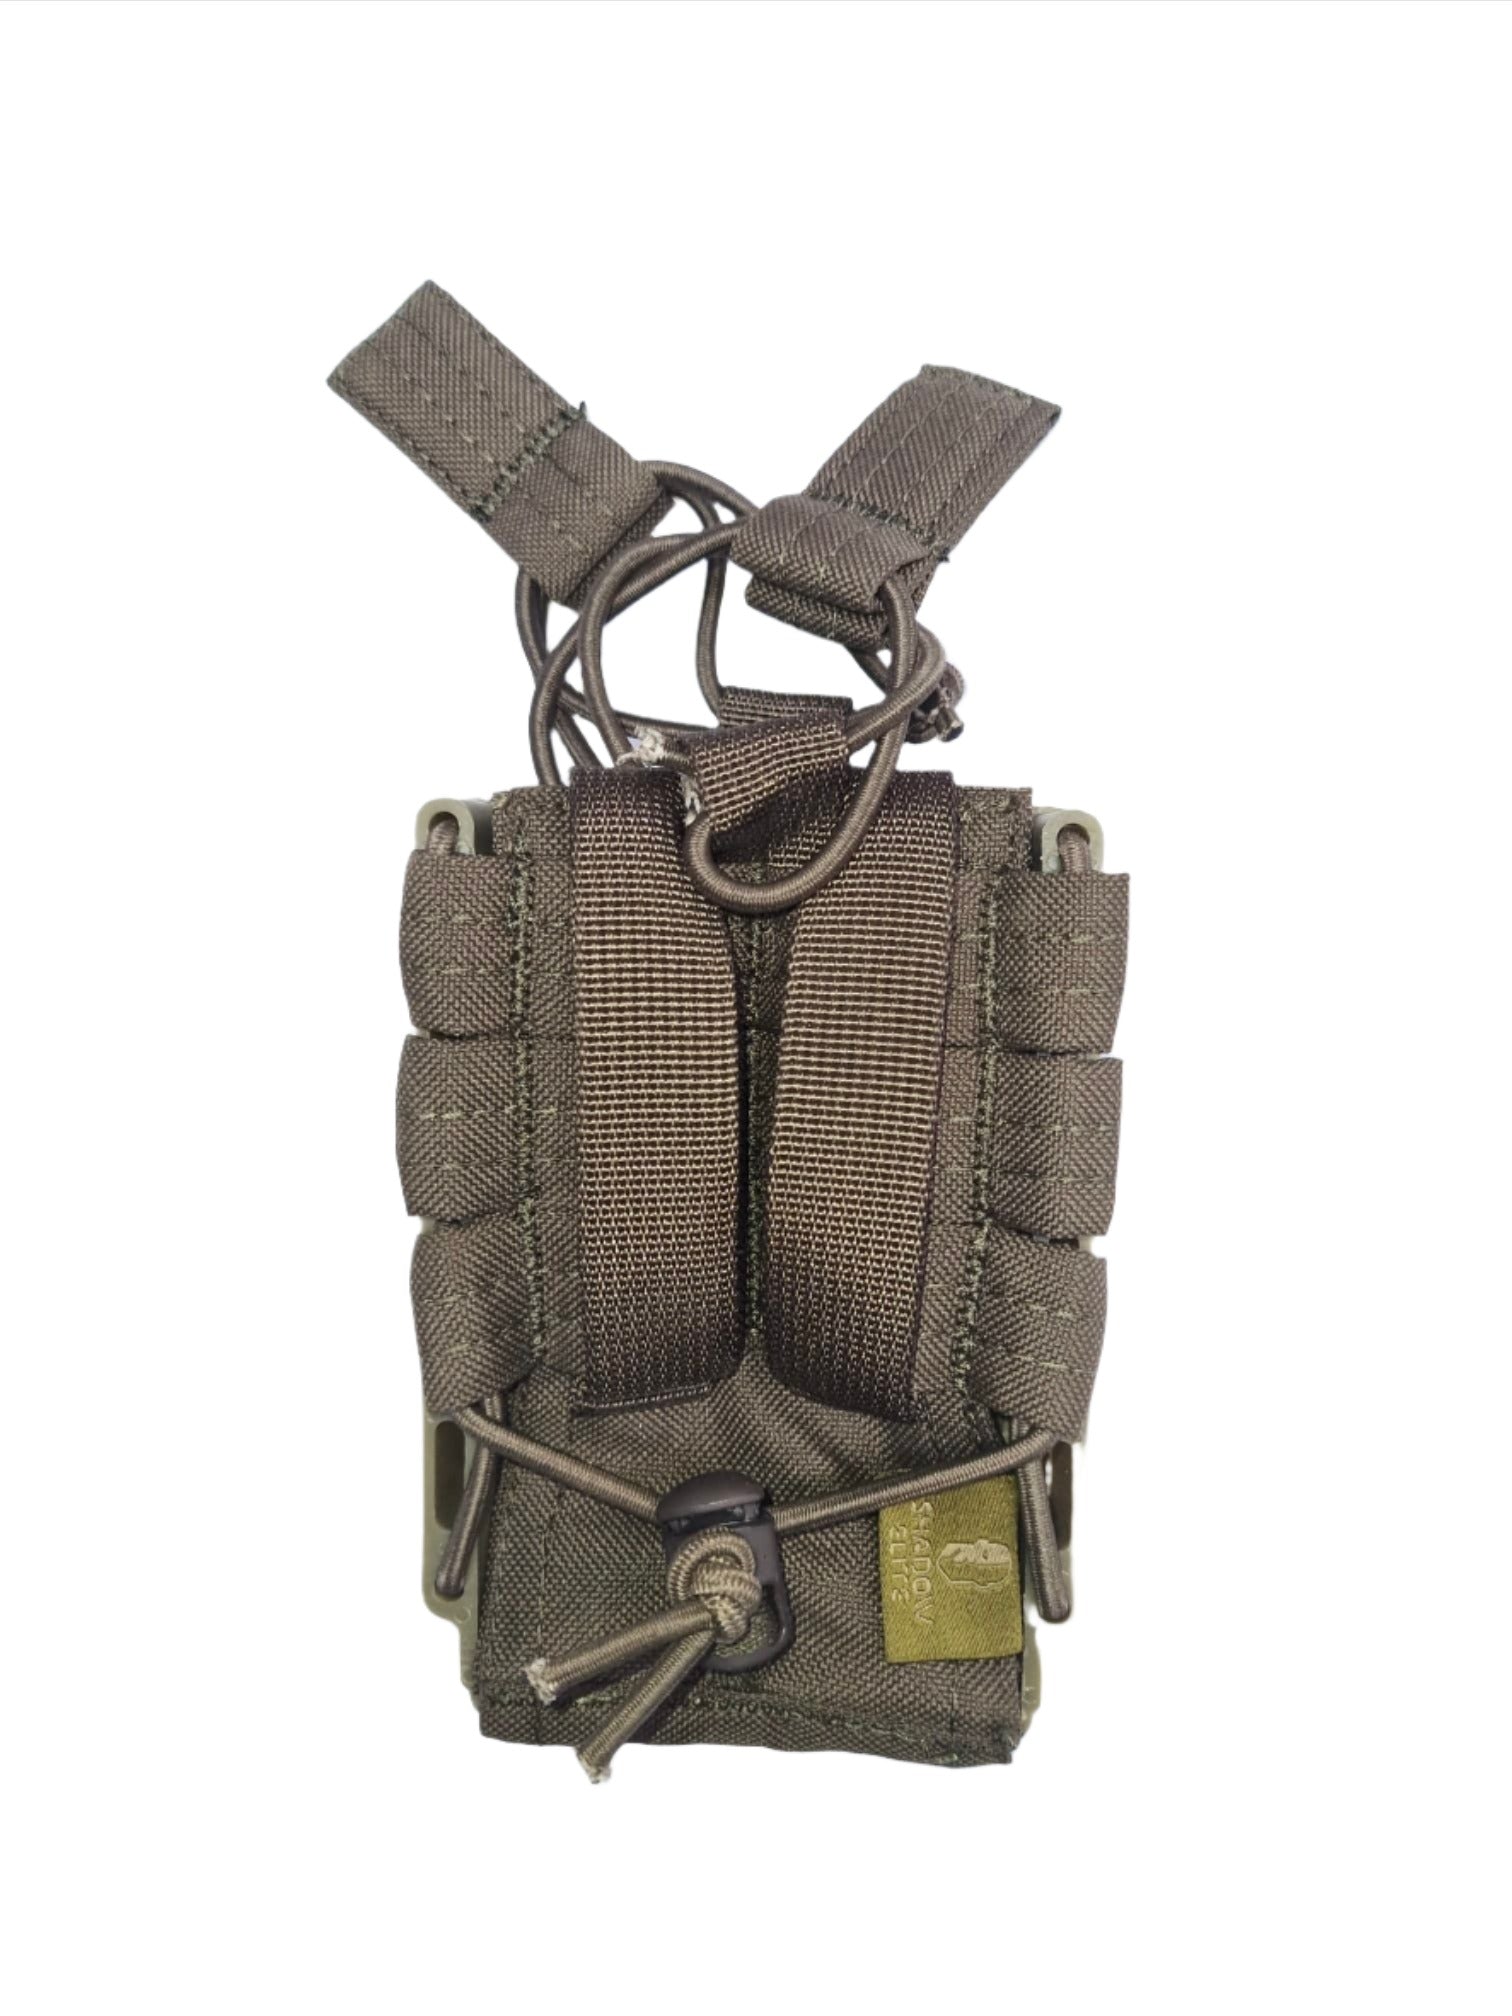 SHE-21020 Rapid Access Double Rifle Magazine Pouch RANGER GREEN